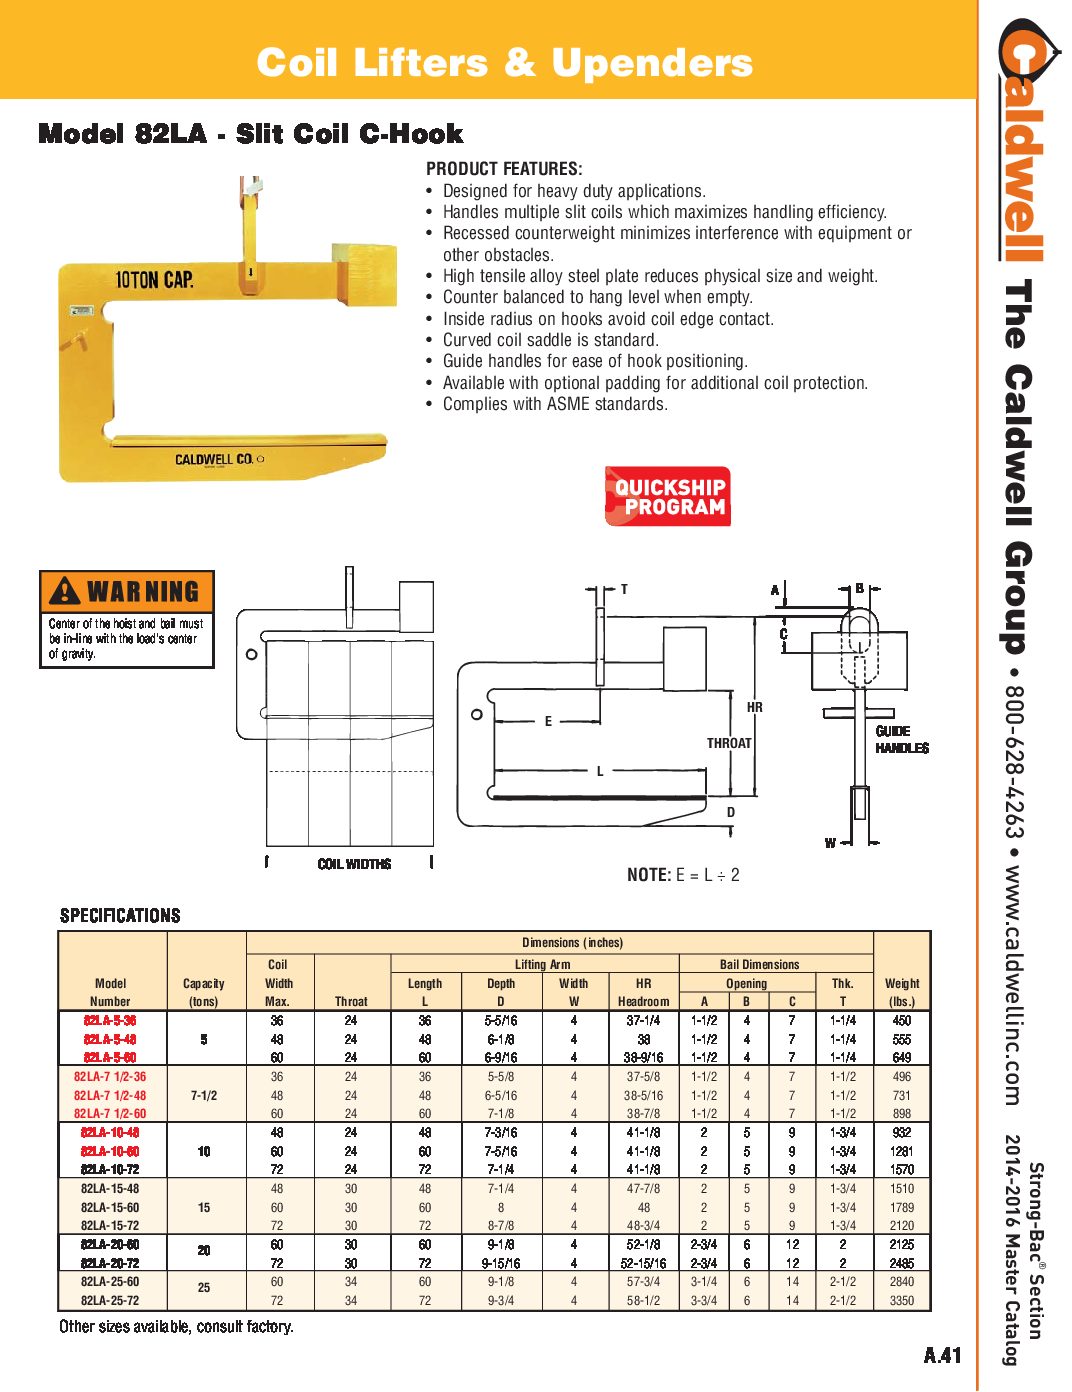 Caldwell STRONG BAC Slit Coil C Hook Coil Lifter Spread Sheet pdf